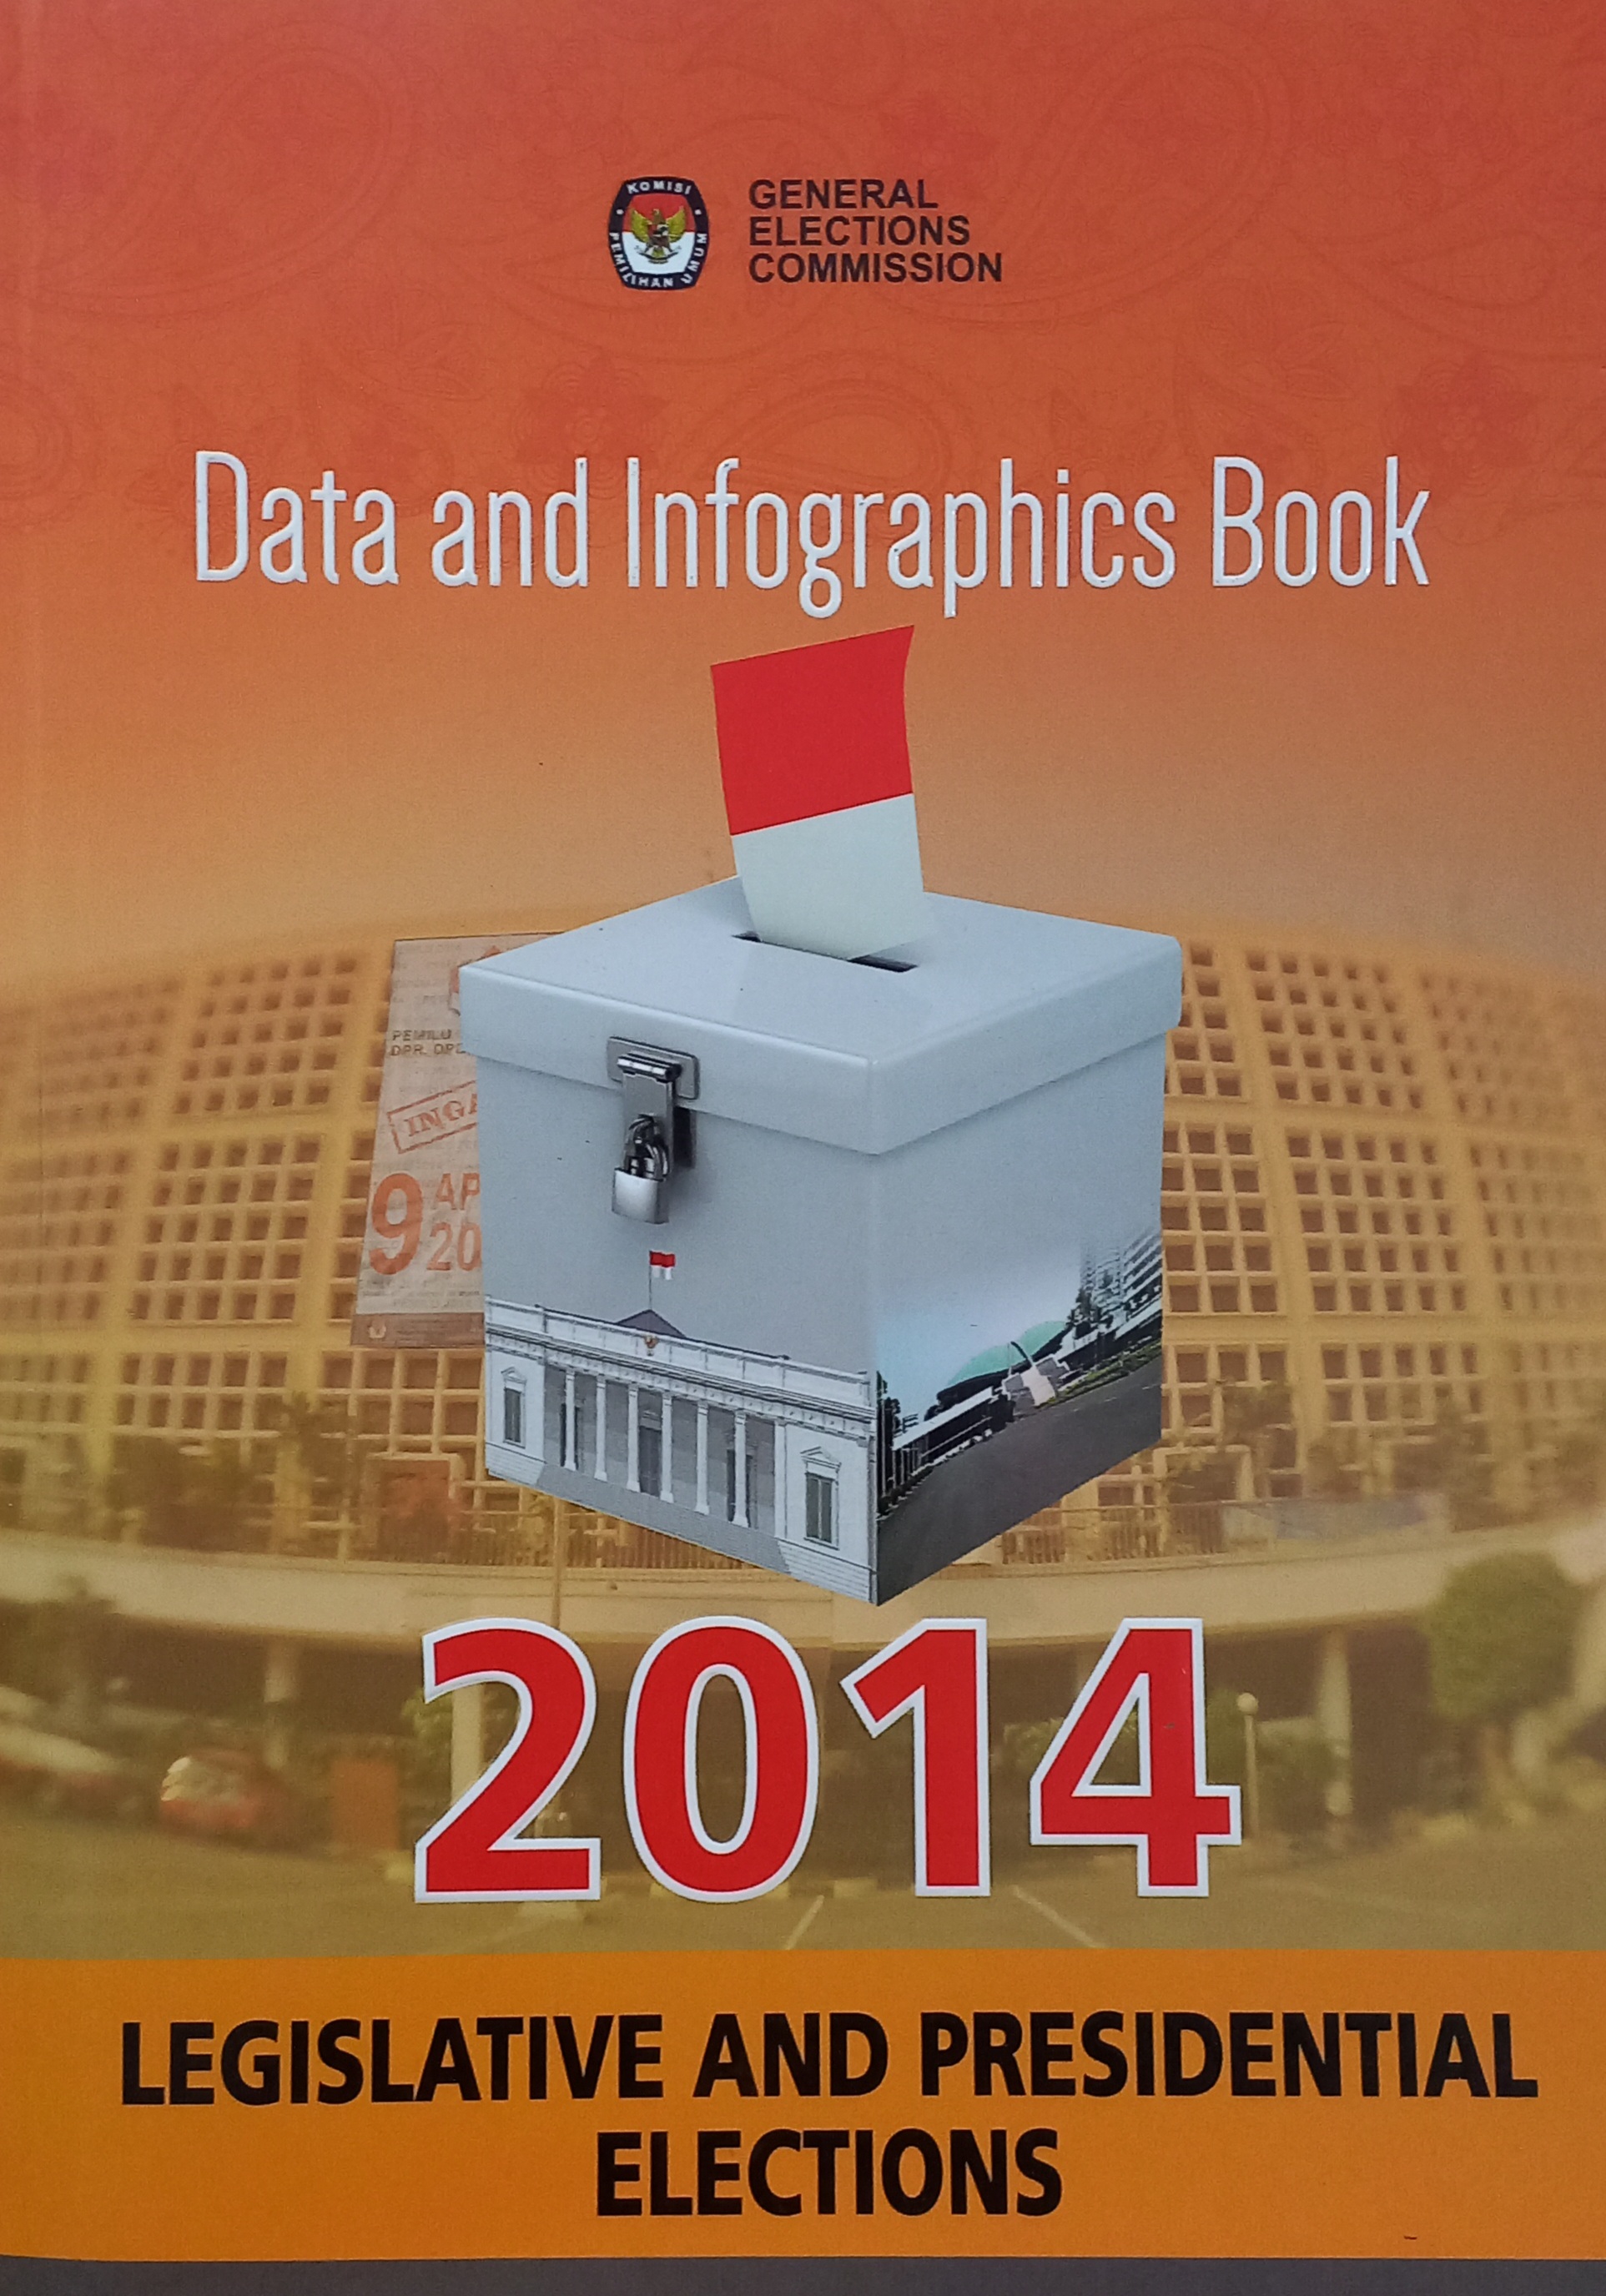 Data and Infographics Book 2014 Legislative and Presidential Elections